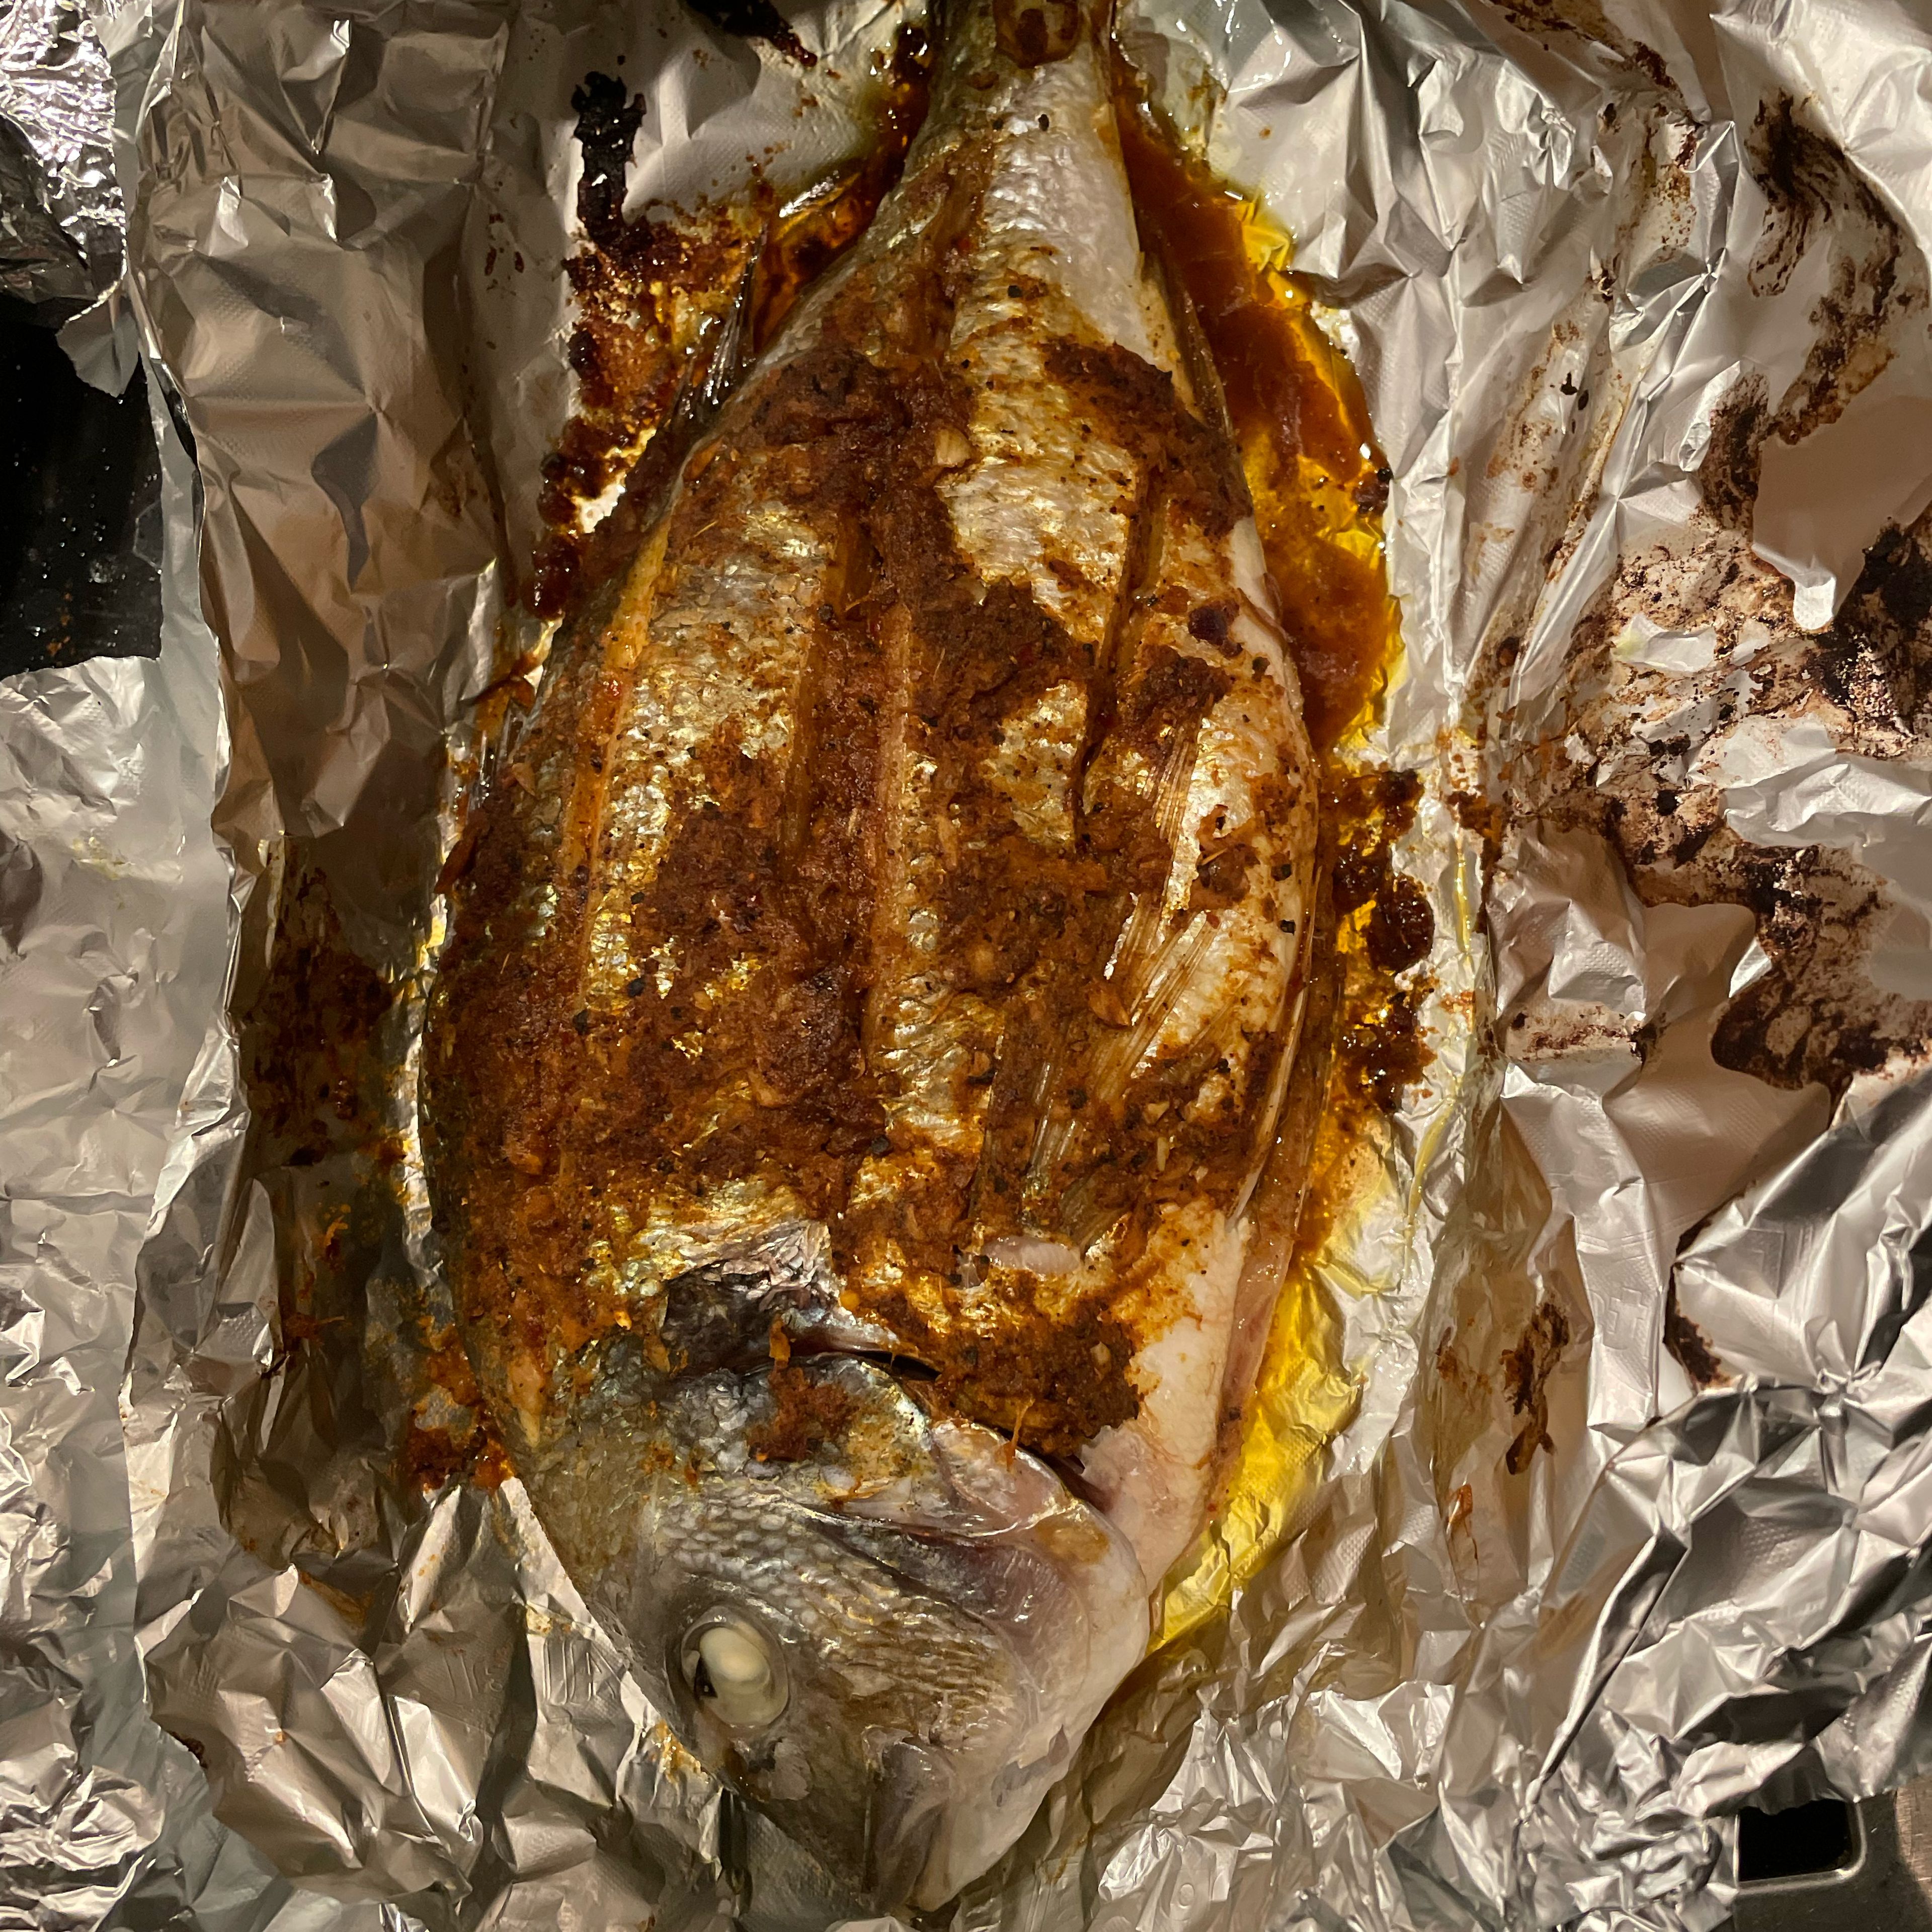 Bake fish for 20min, check whether the fish is done before removing from oven.